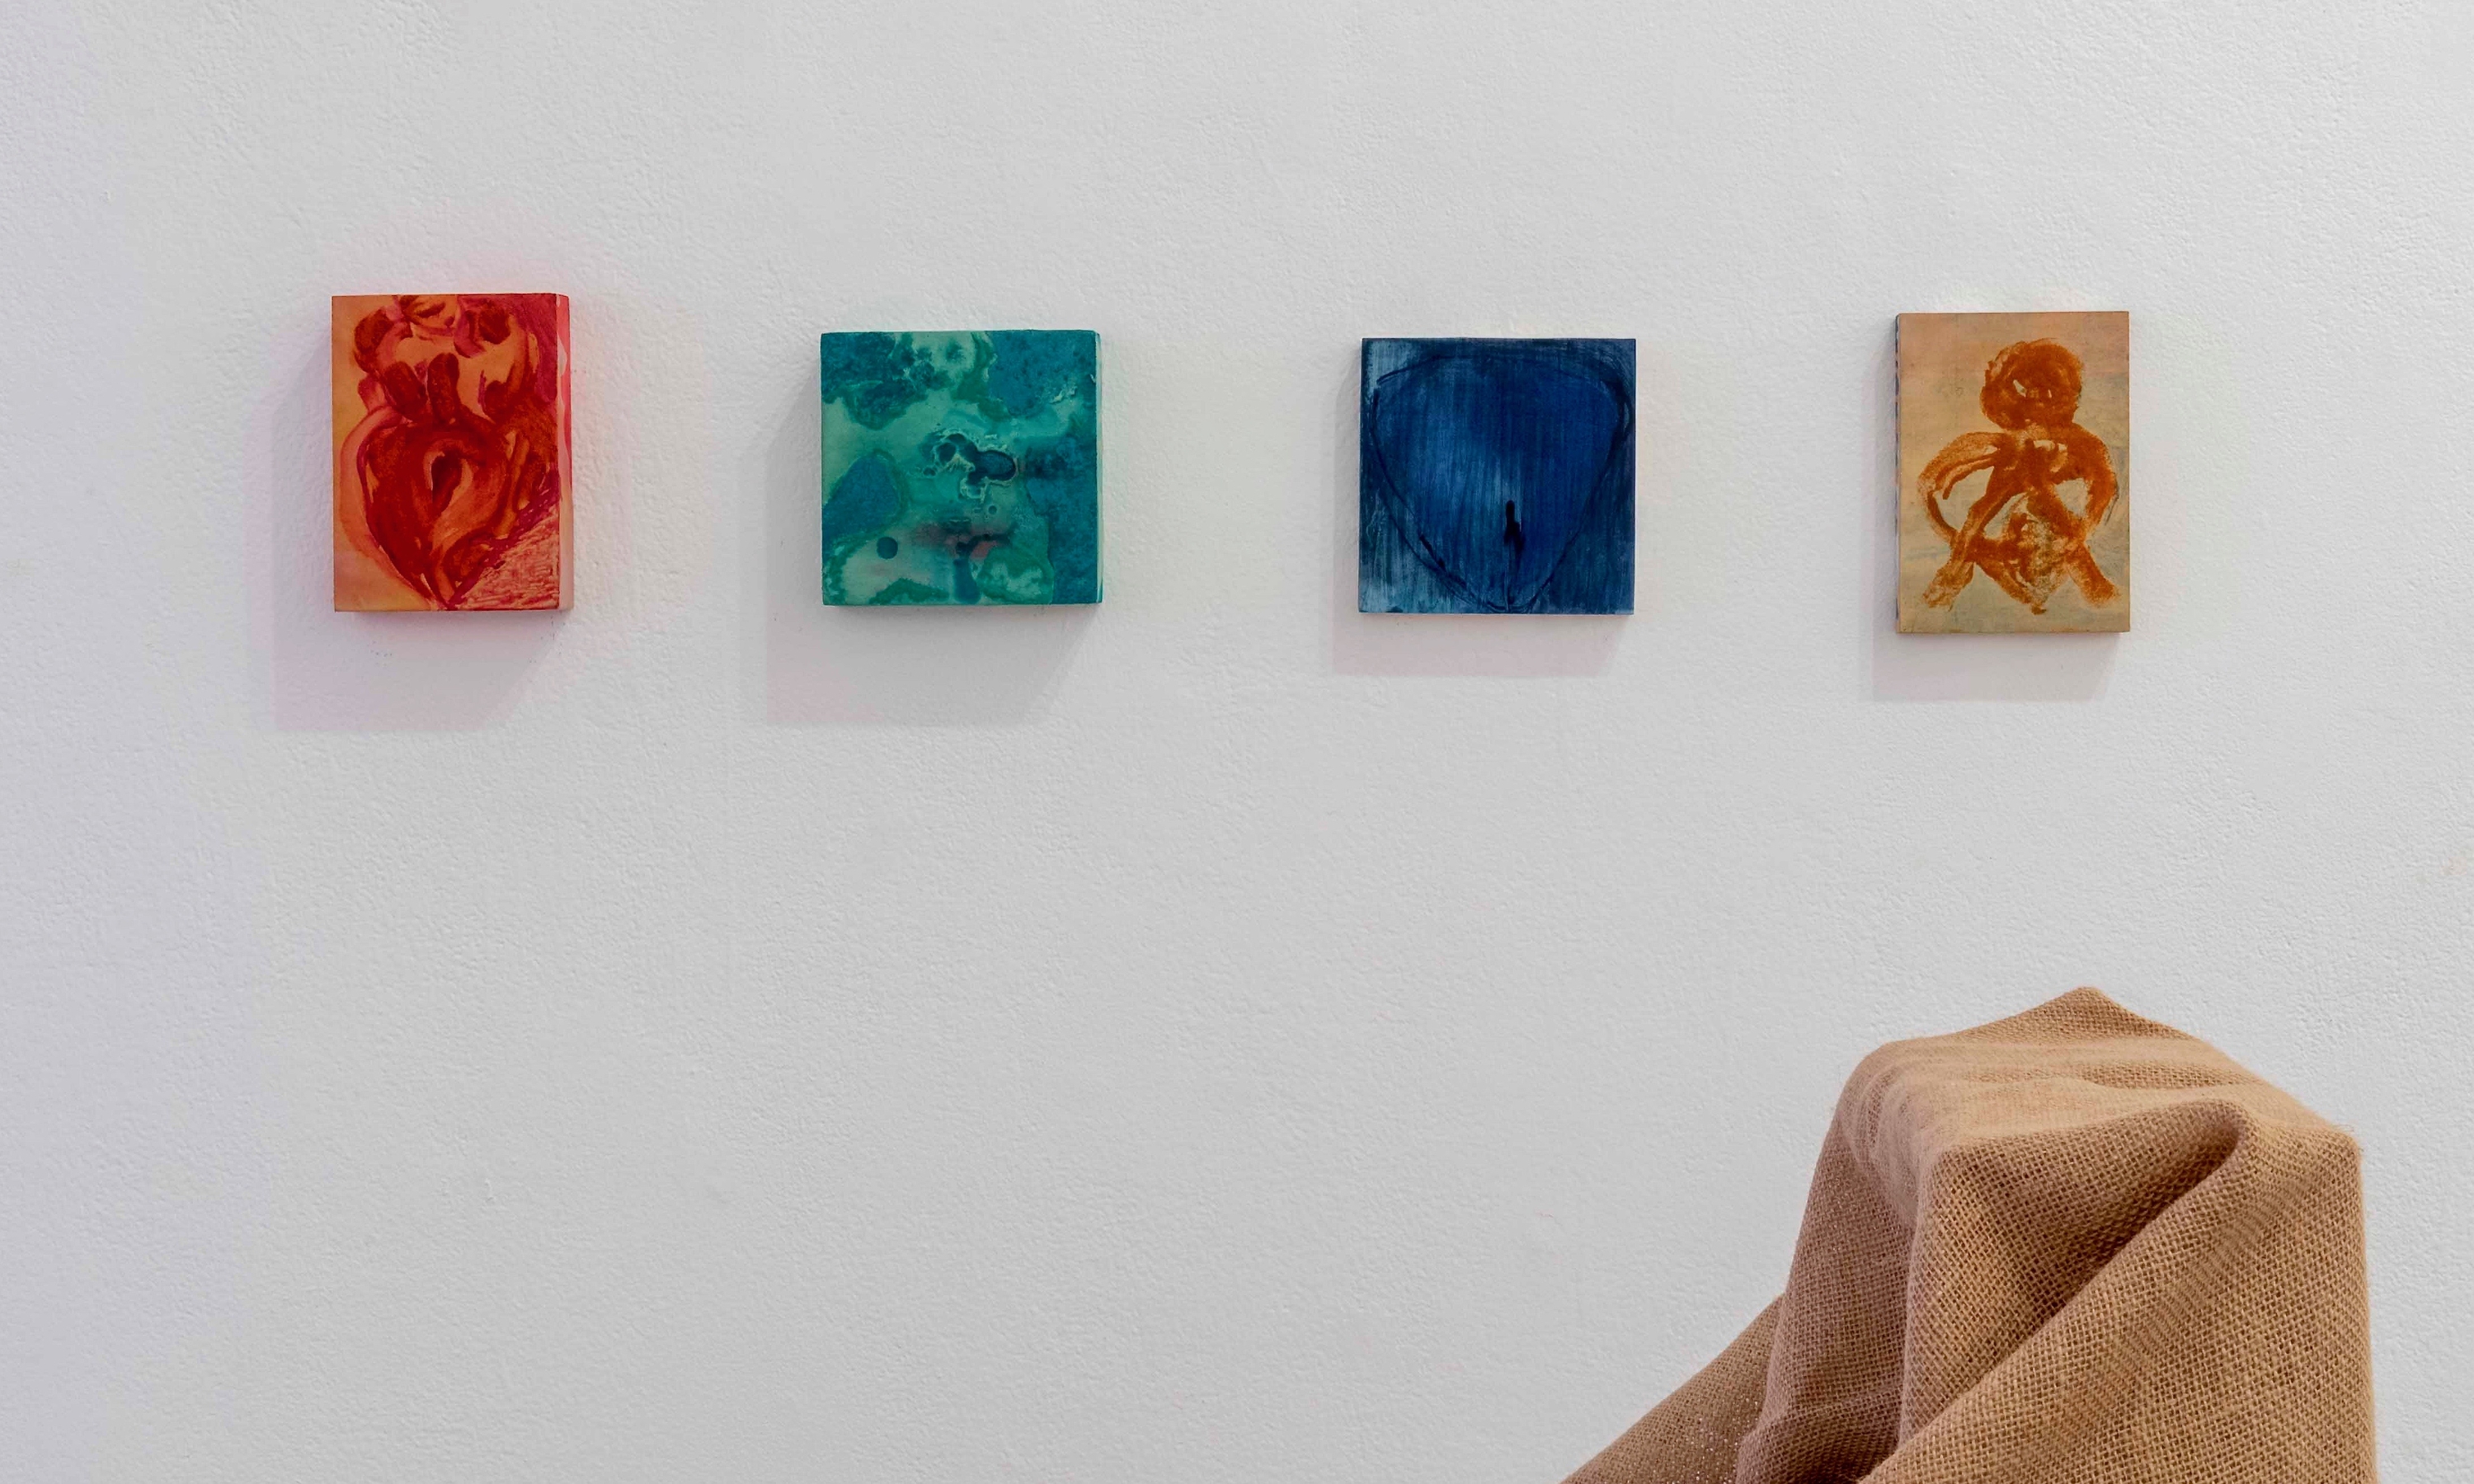 Installation view of four small paintings